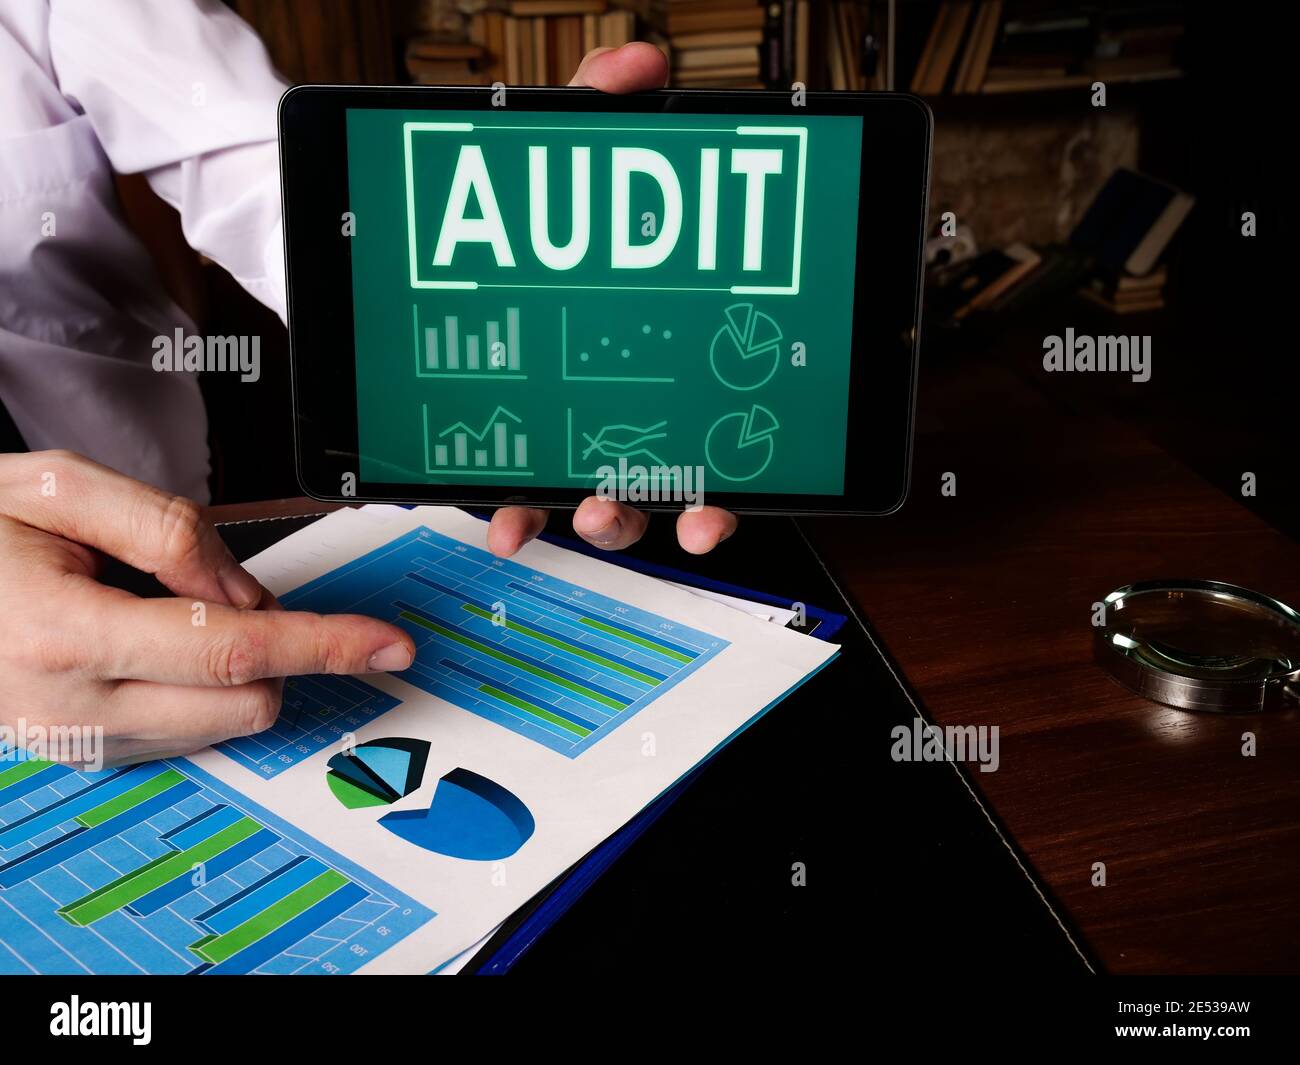 Auditor shows audit results at the tablet. Stock Photo